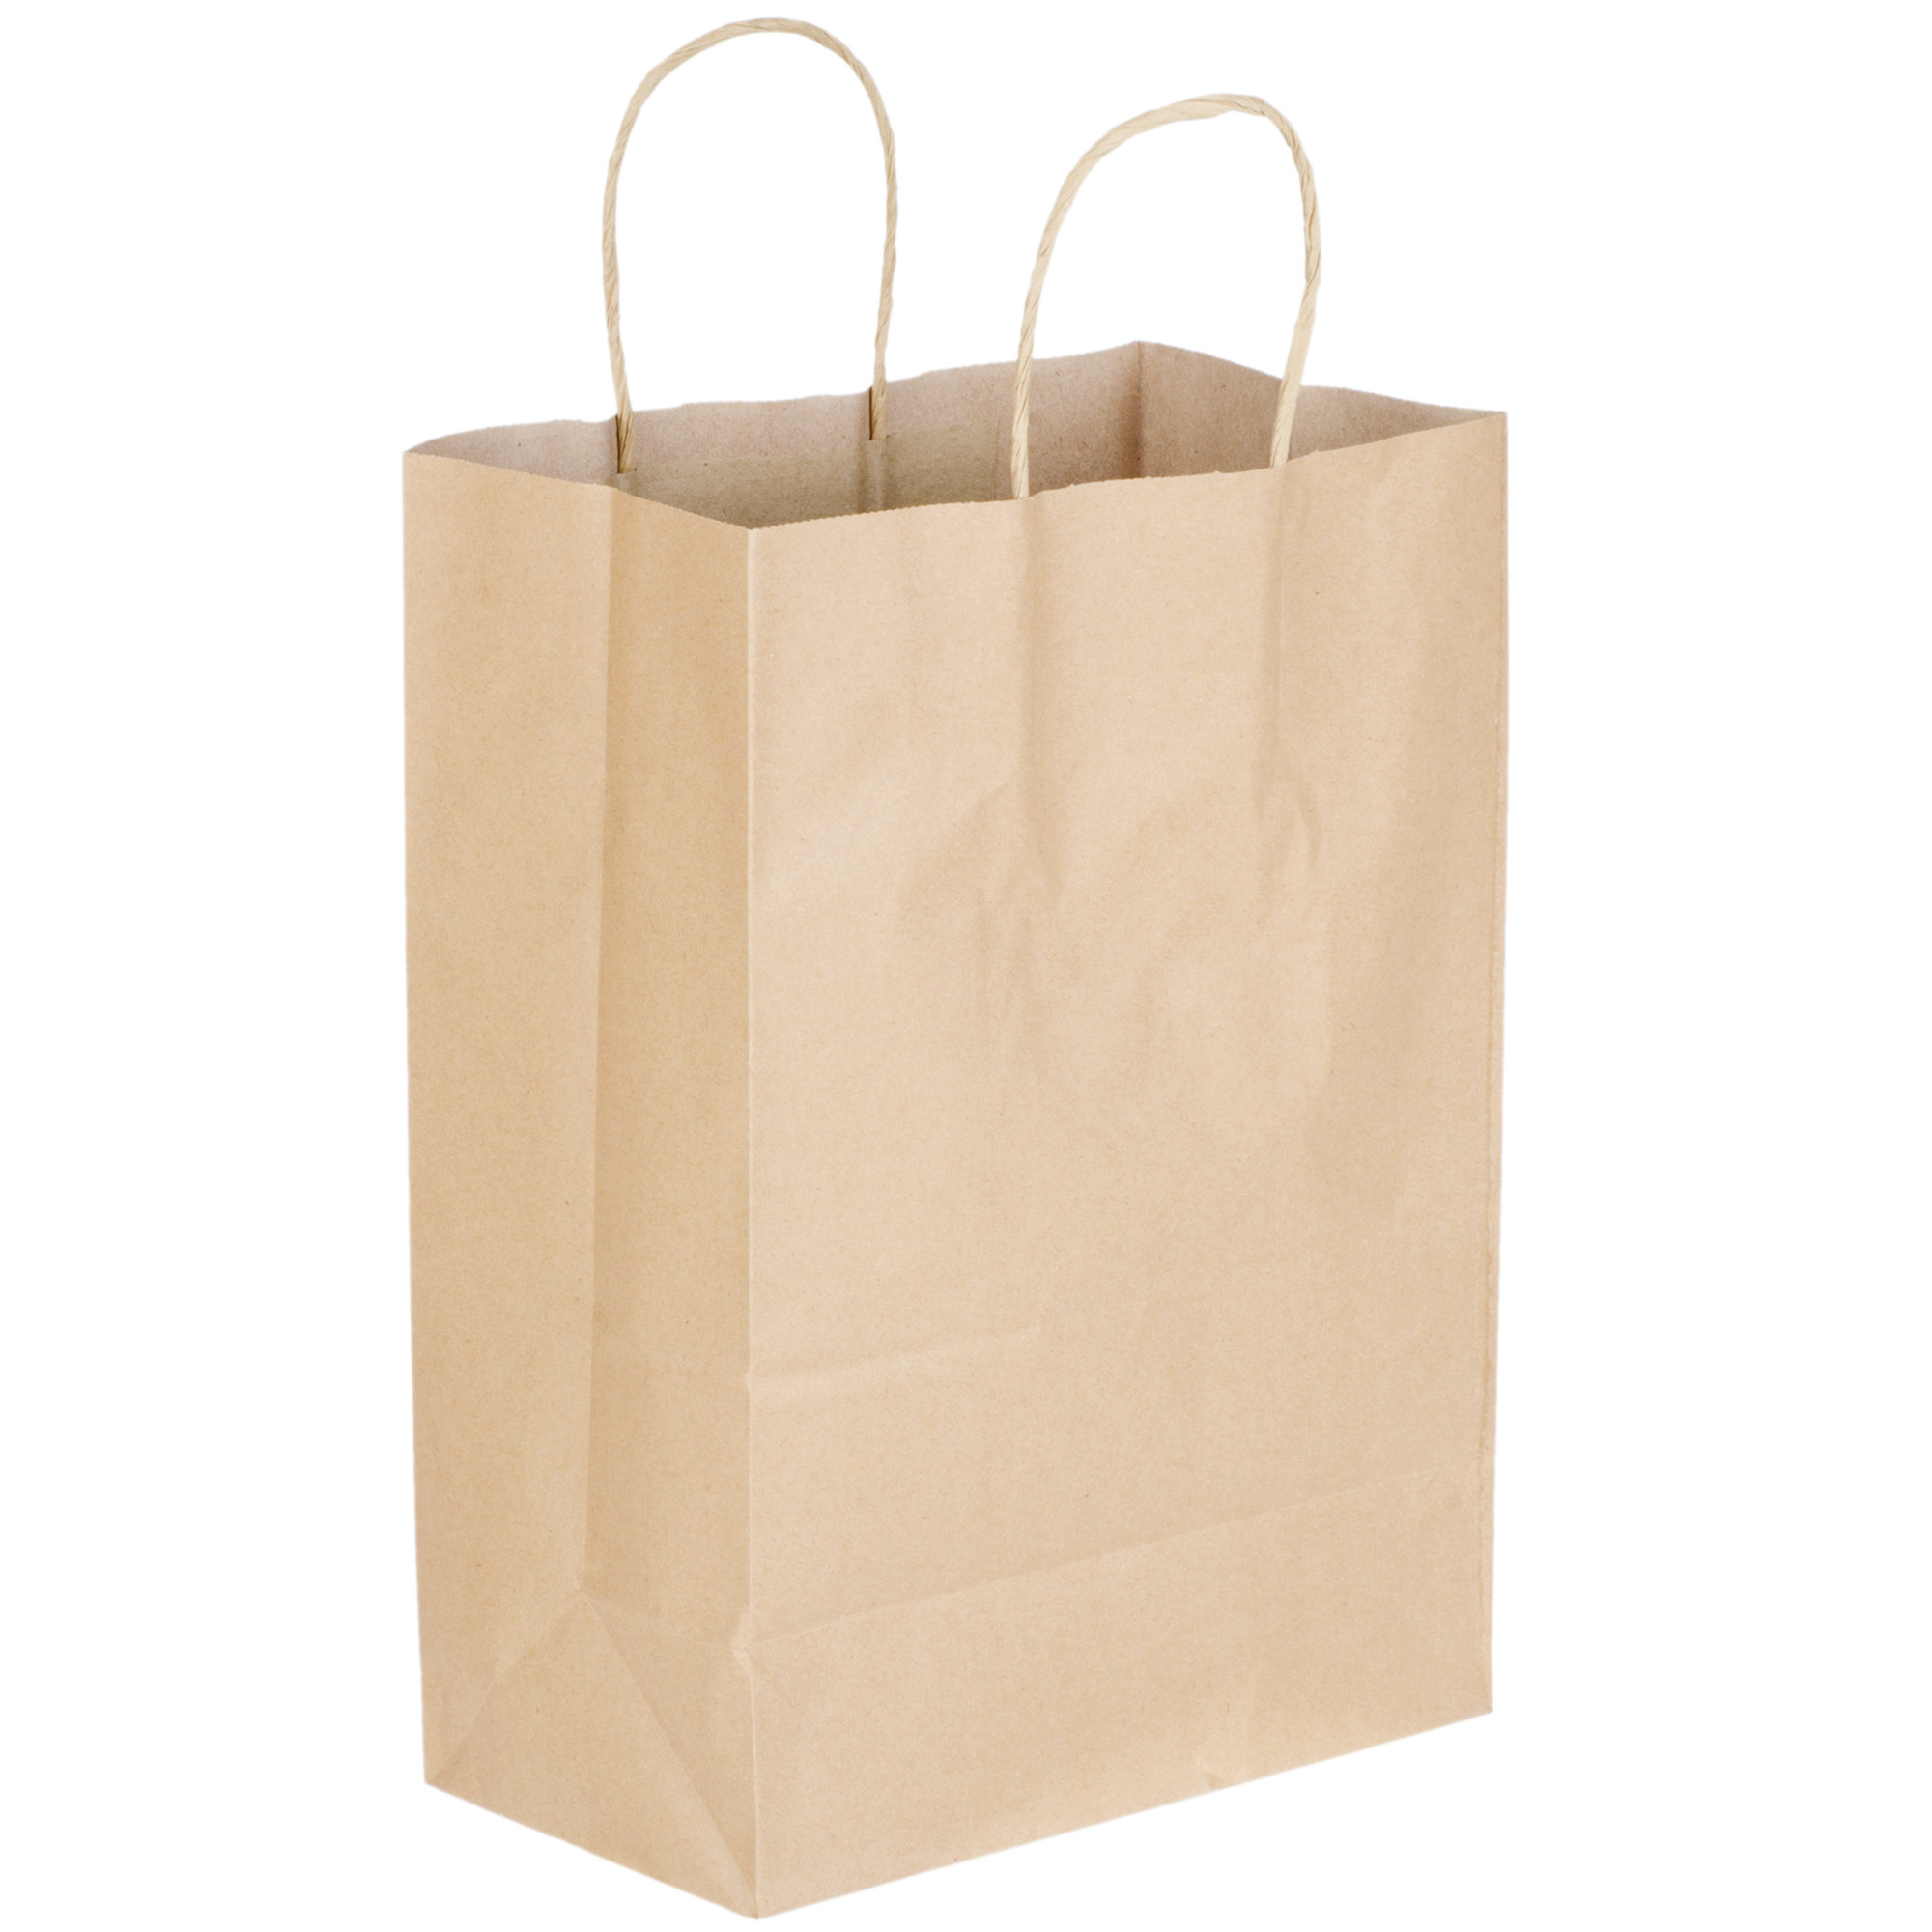 NATURAL KRAFT SHOPPING BAG
WITH TWISTED HANDLES, SMALL, 
10&quot;x5.5&quot;x13.25&quot;, 250/BUNDLE